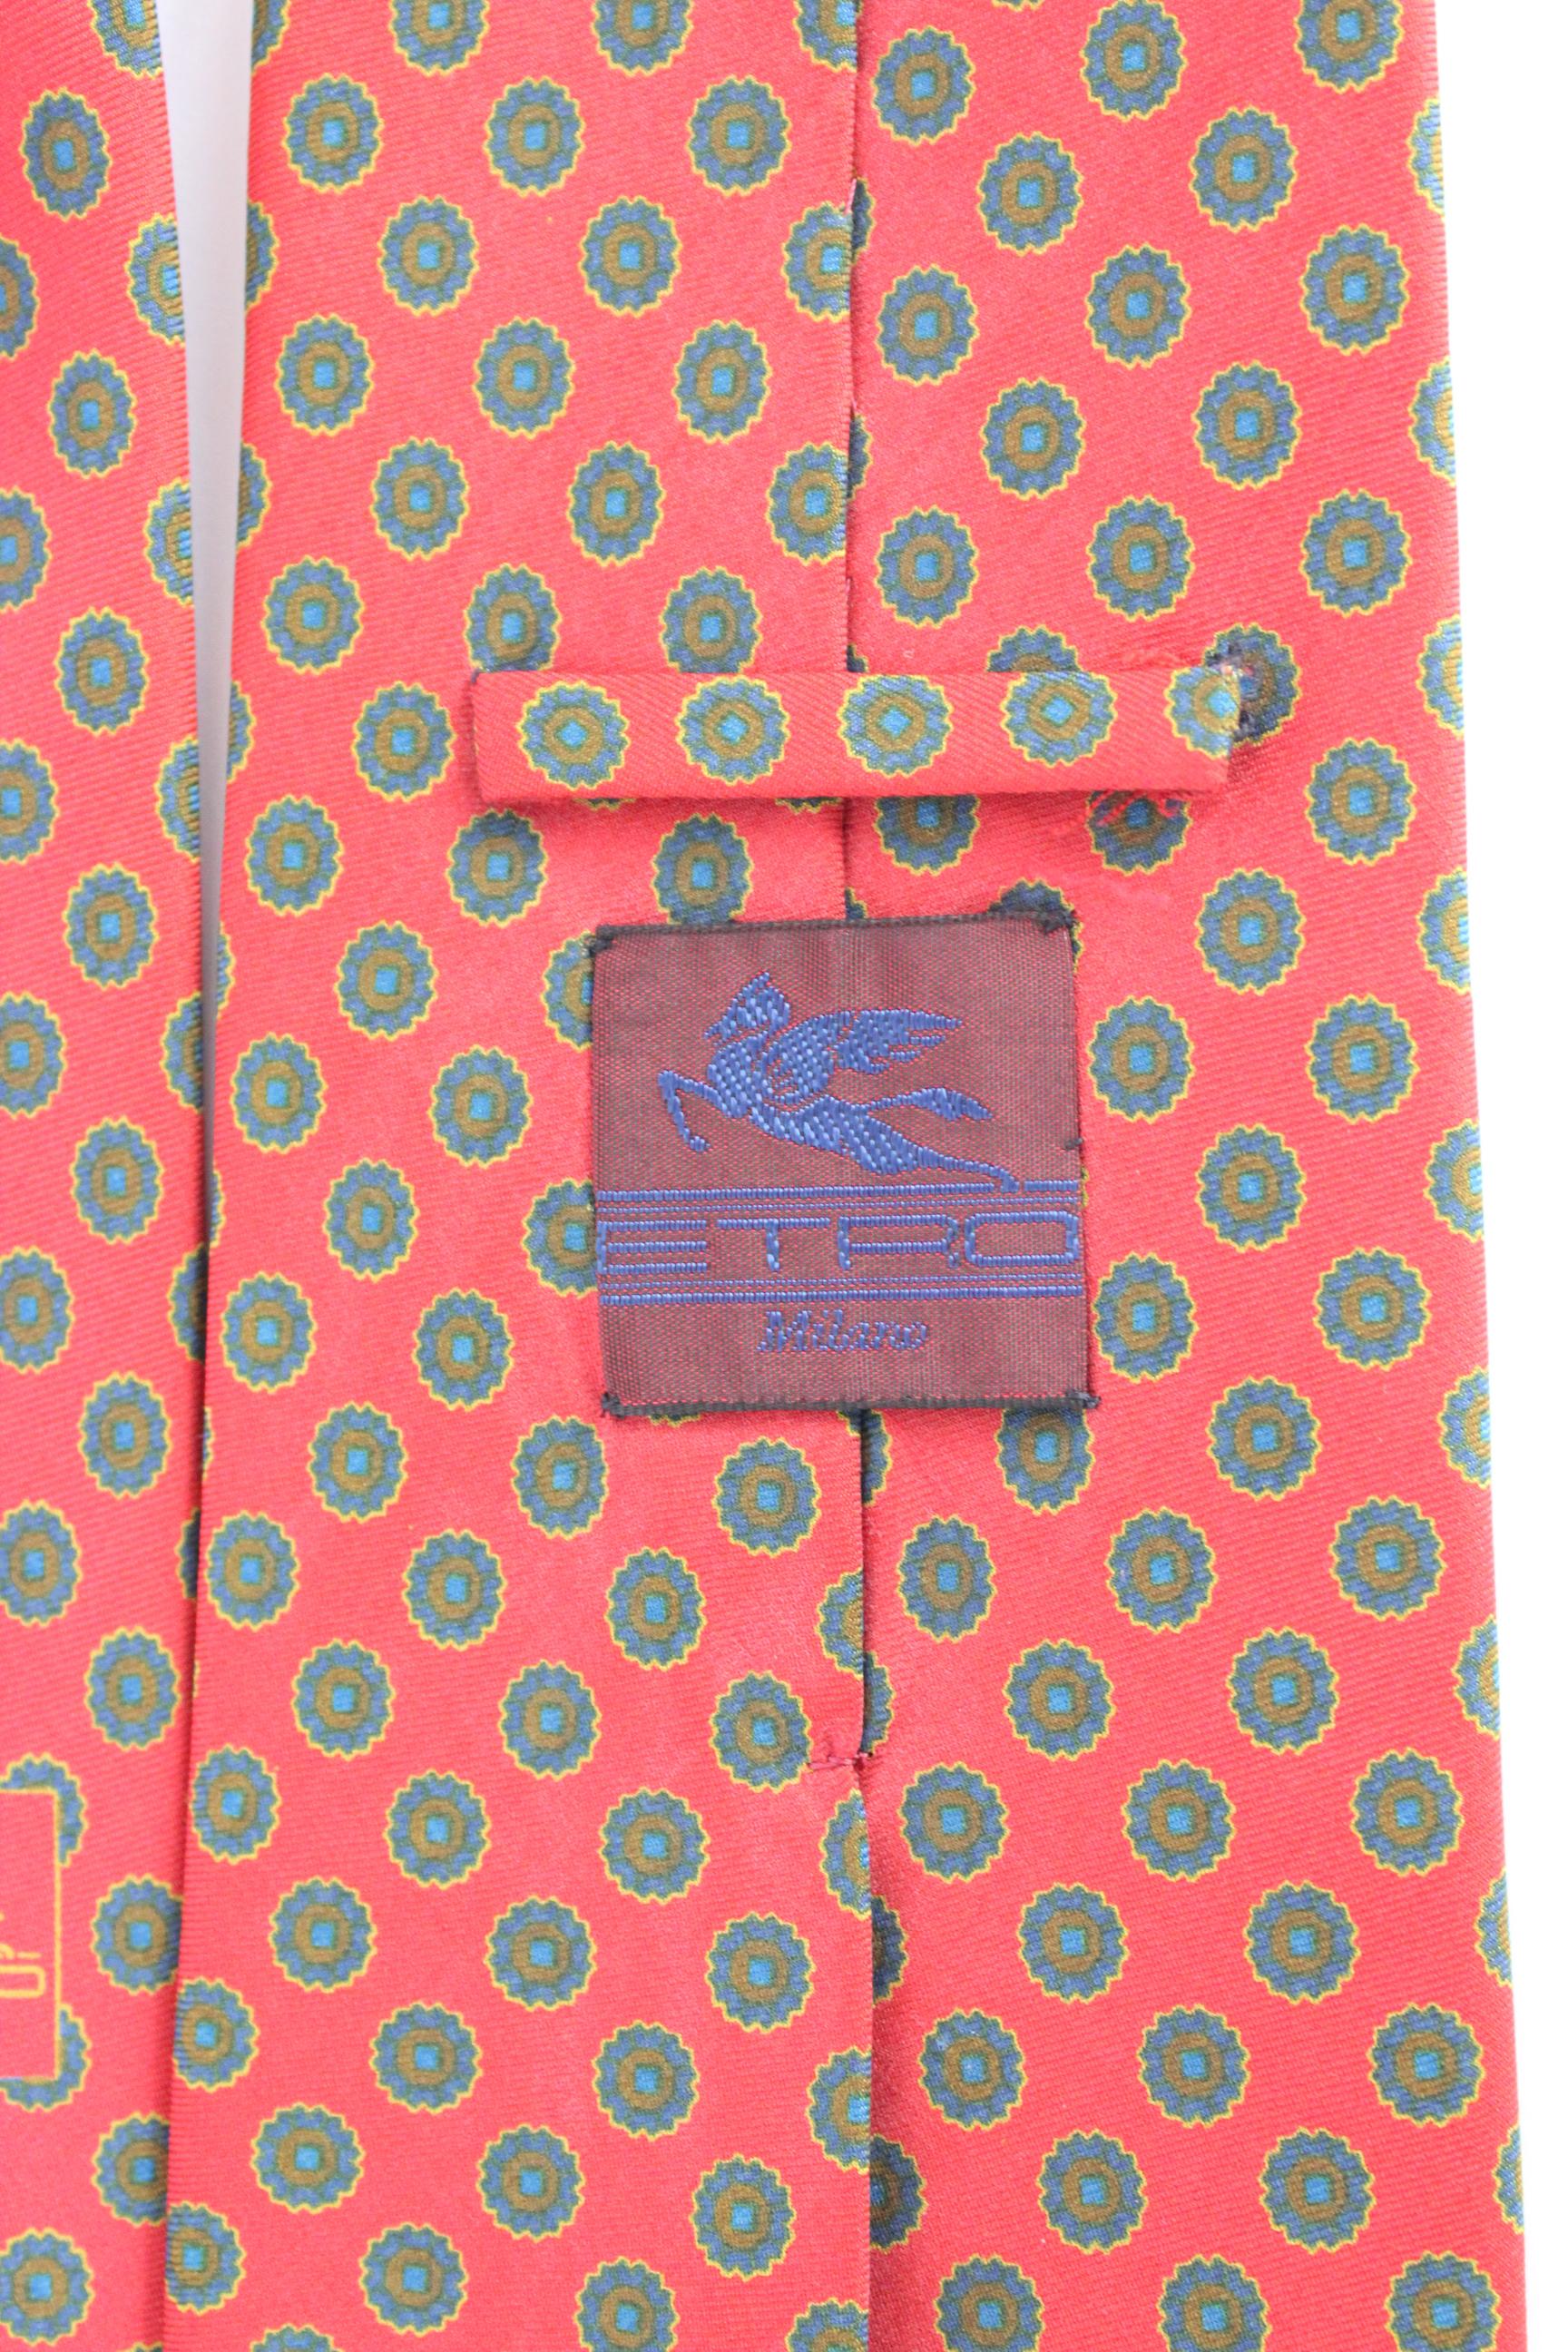 Etro Red Blue Silk Polka Dot Classic Tie In Excellent Condition For Sale In Brindisi, Bt